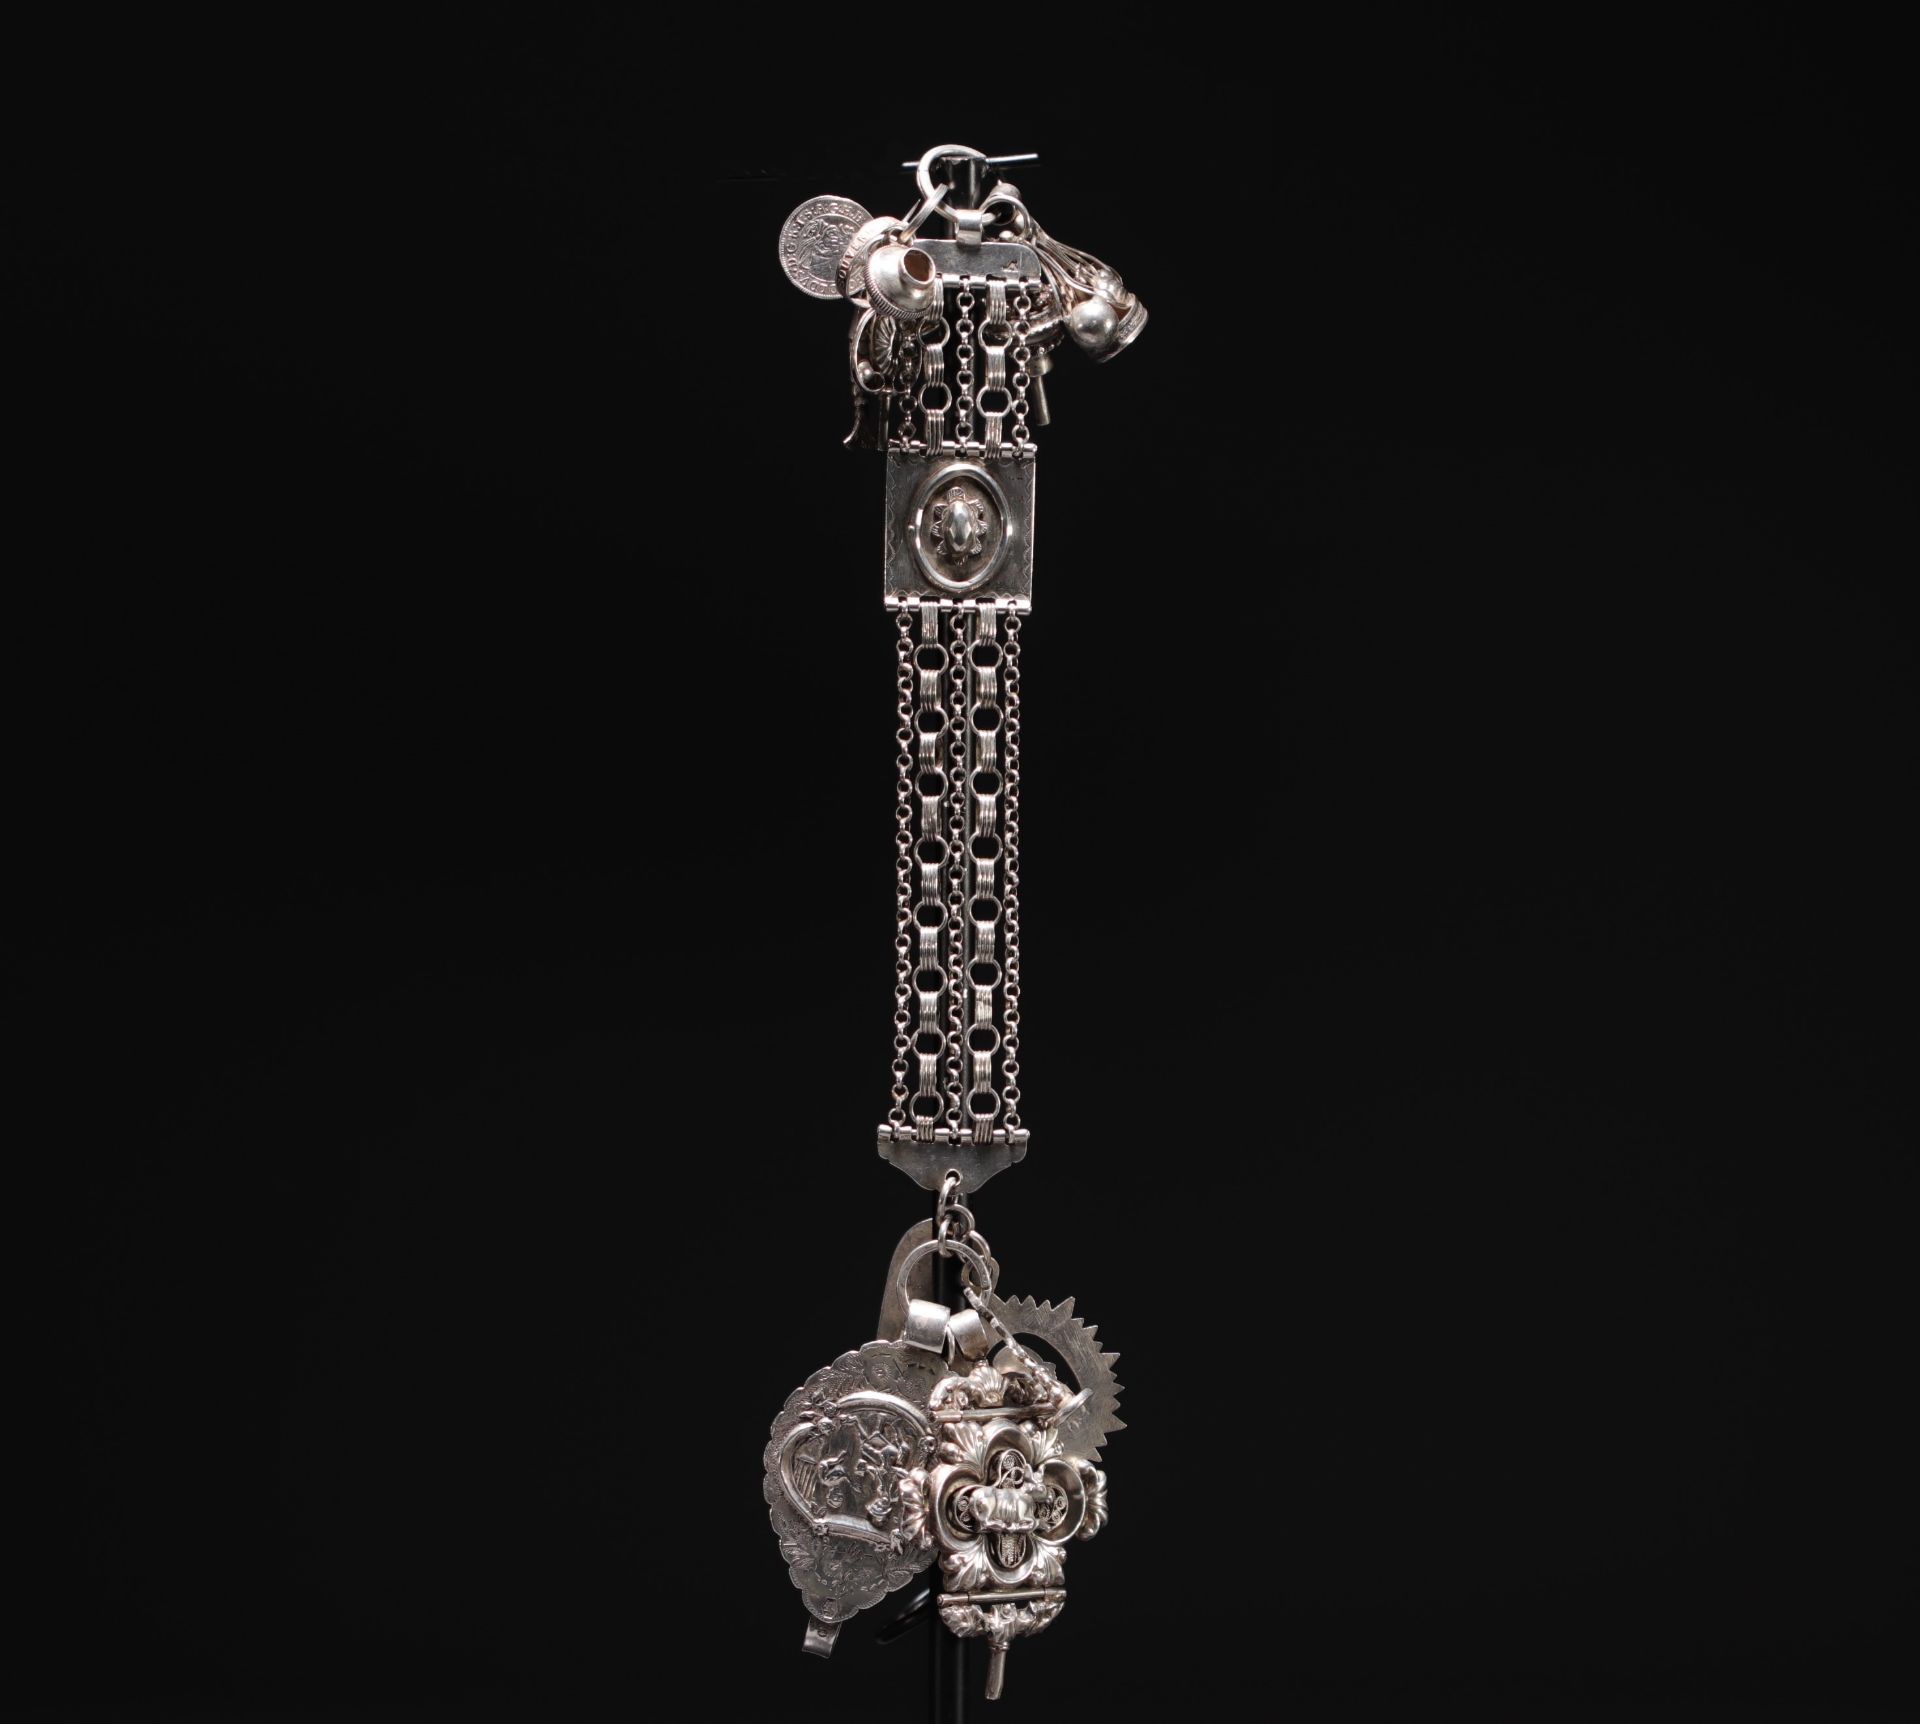 Magnificent large silver chatelaine decorated with various charms, Dutch hallmarks and others.